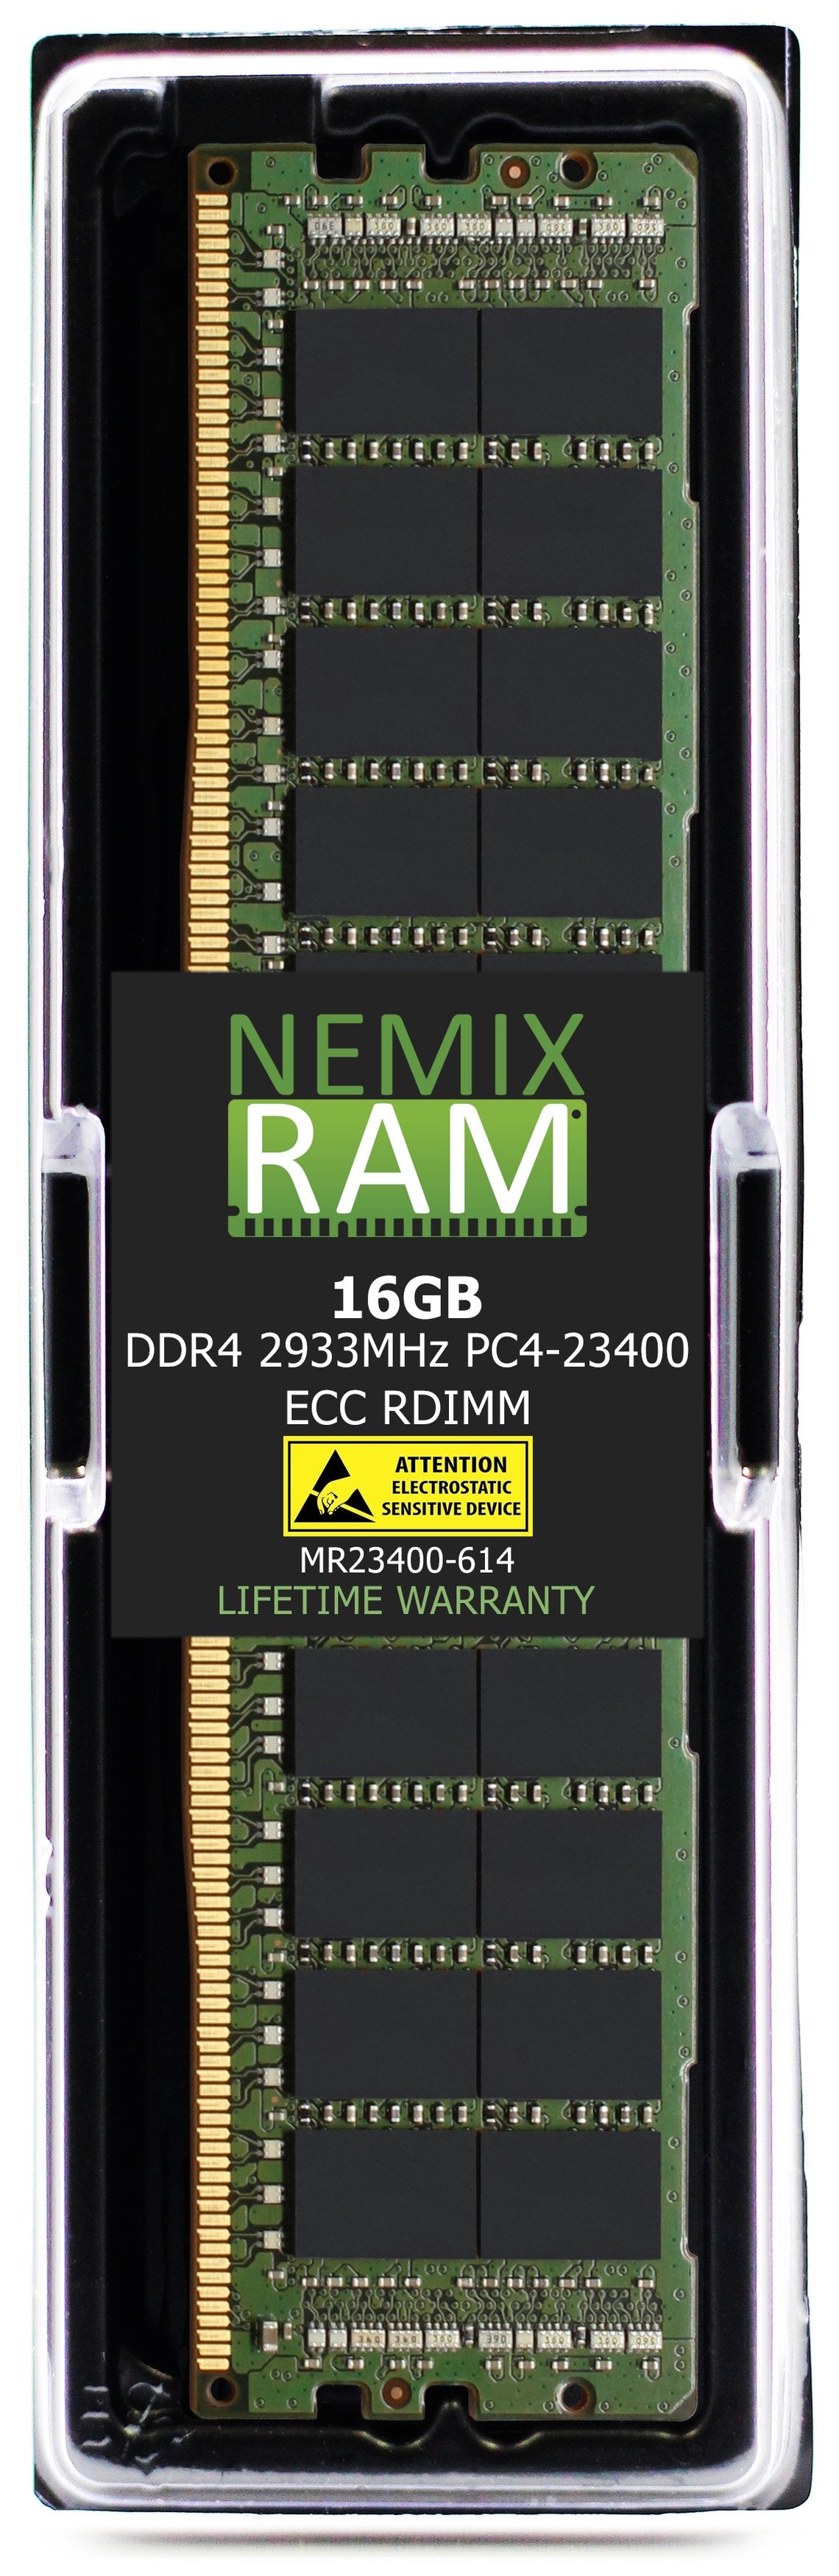 16GB DDR4 2933MHZ PC4-23400 RDIMM Compatible with Supermicro MEM-DR416MB-ER29